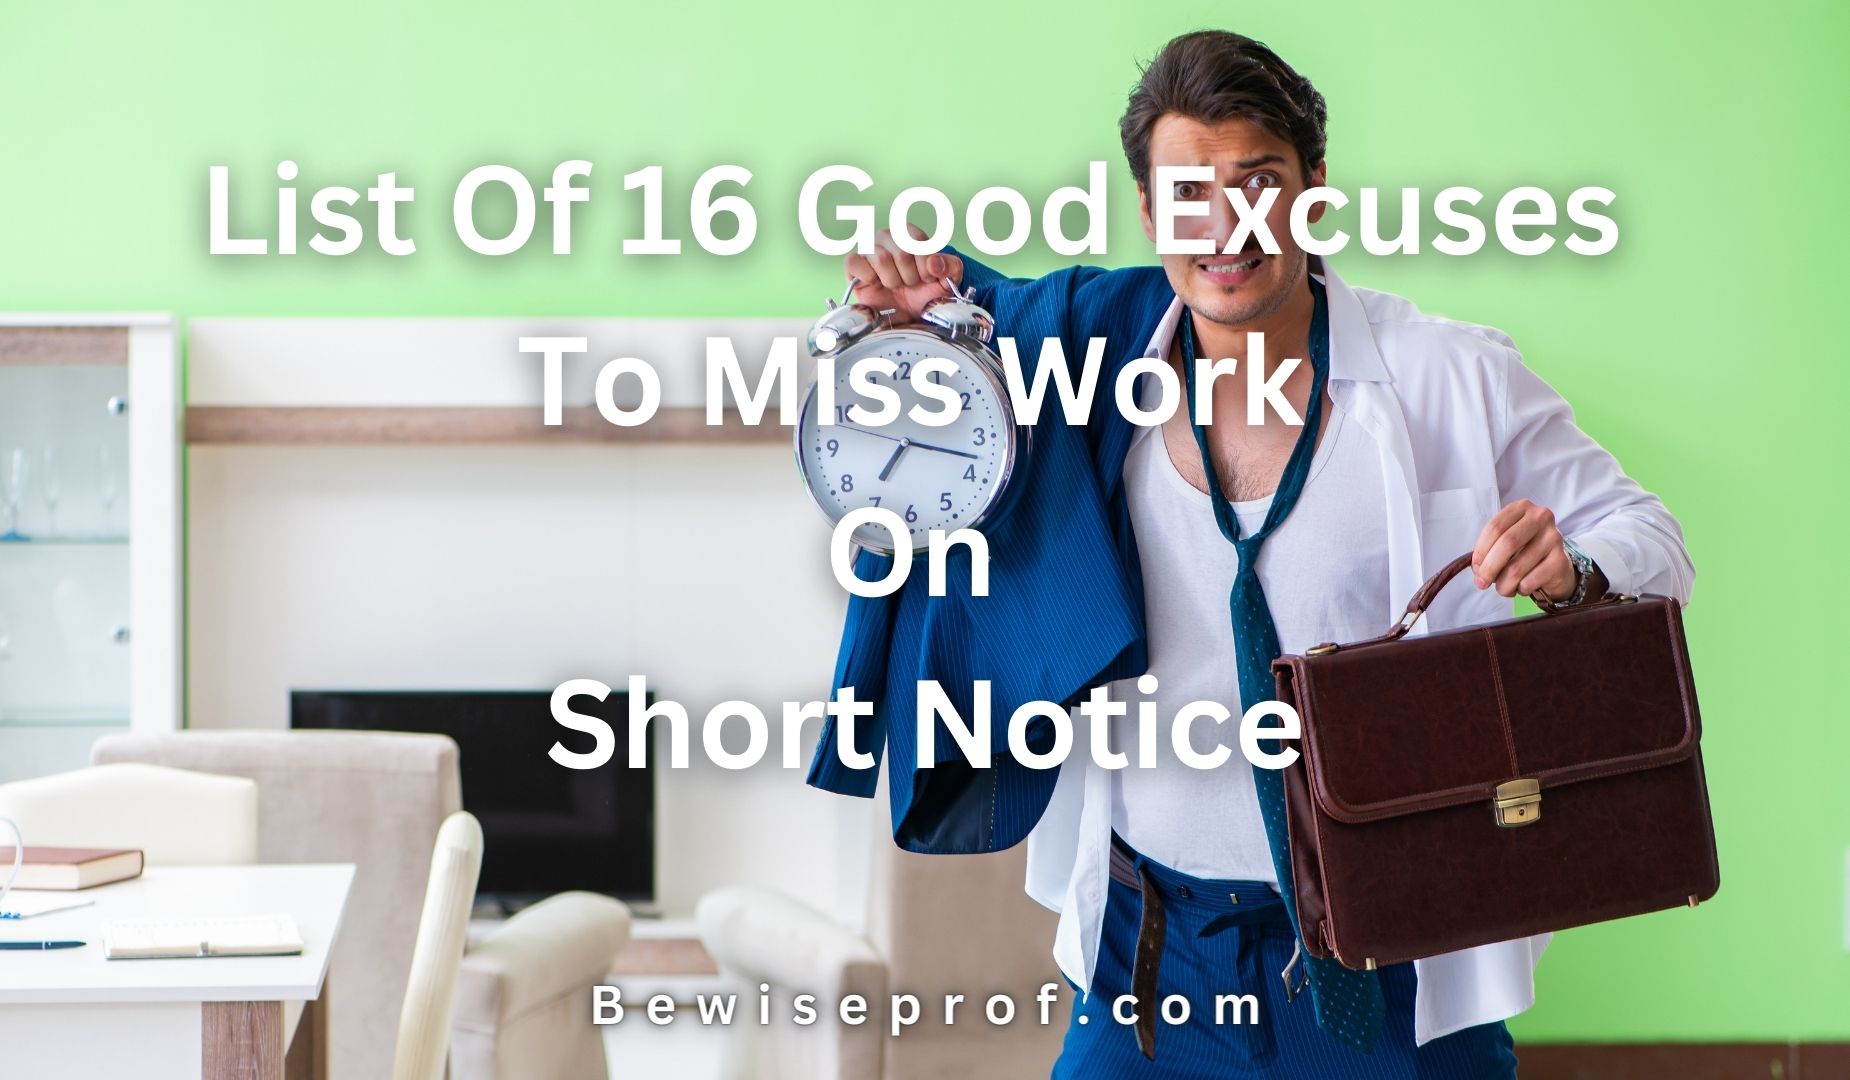 List Of 16 Good Excuses To Miss Work On Short Notice